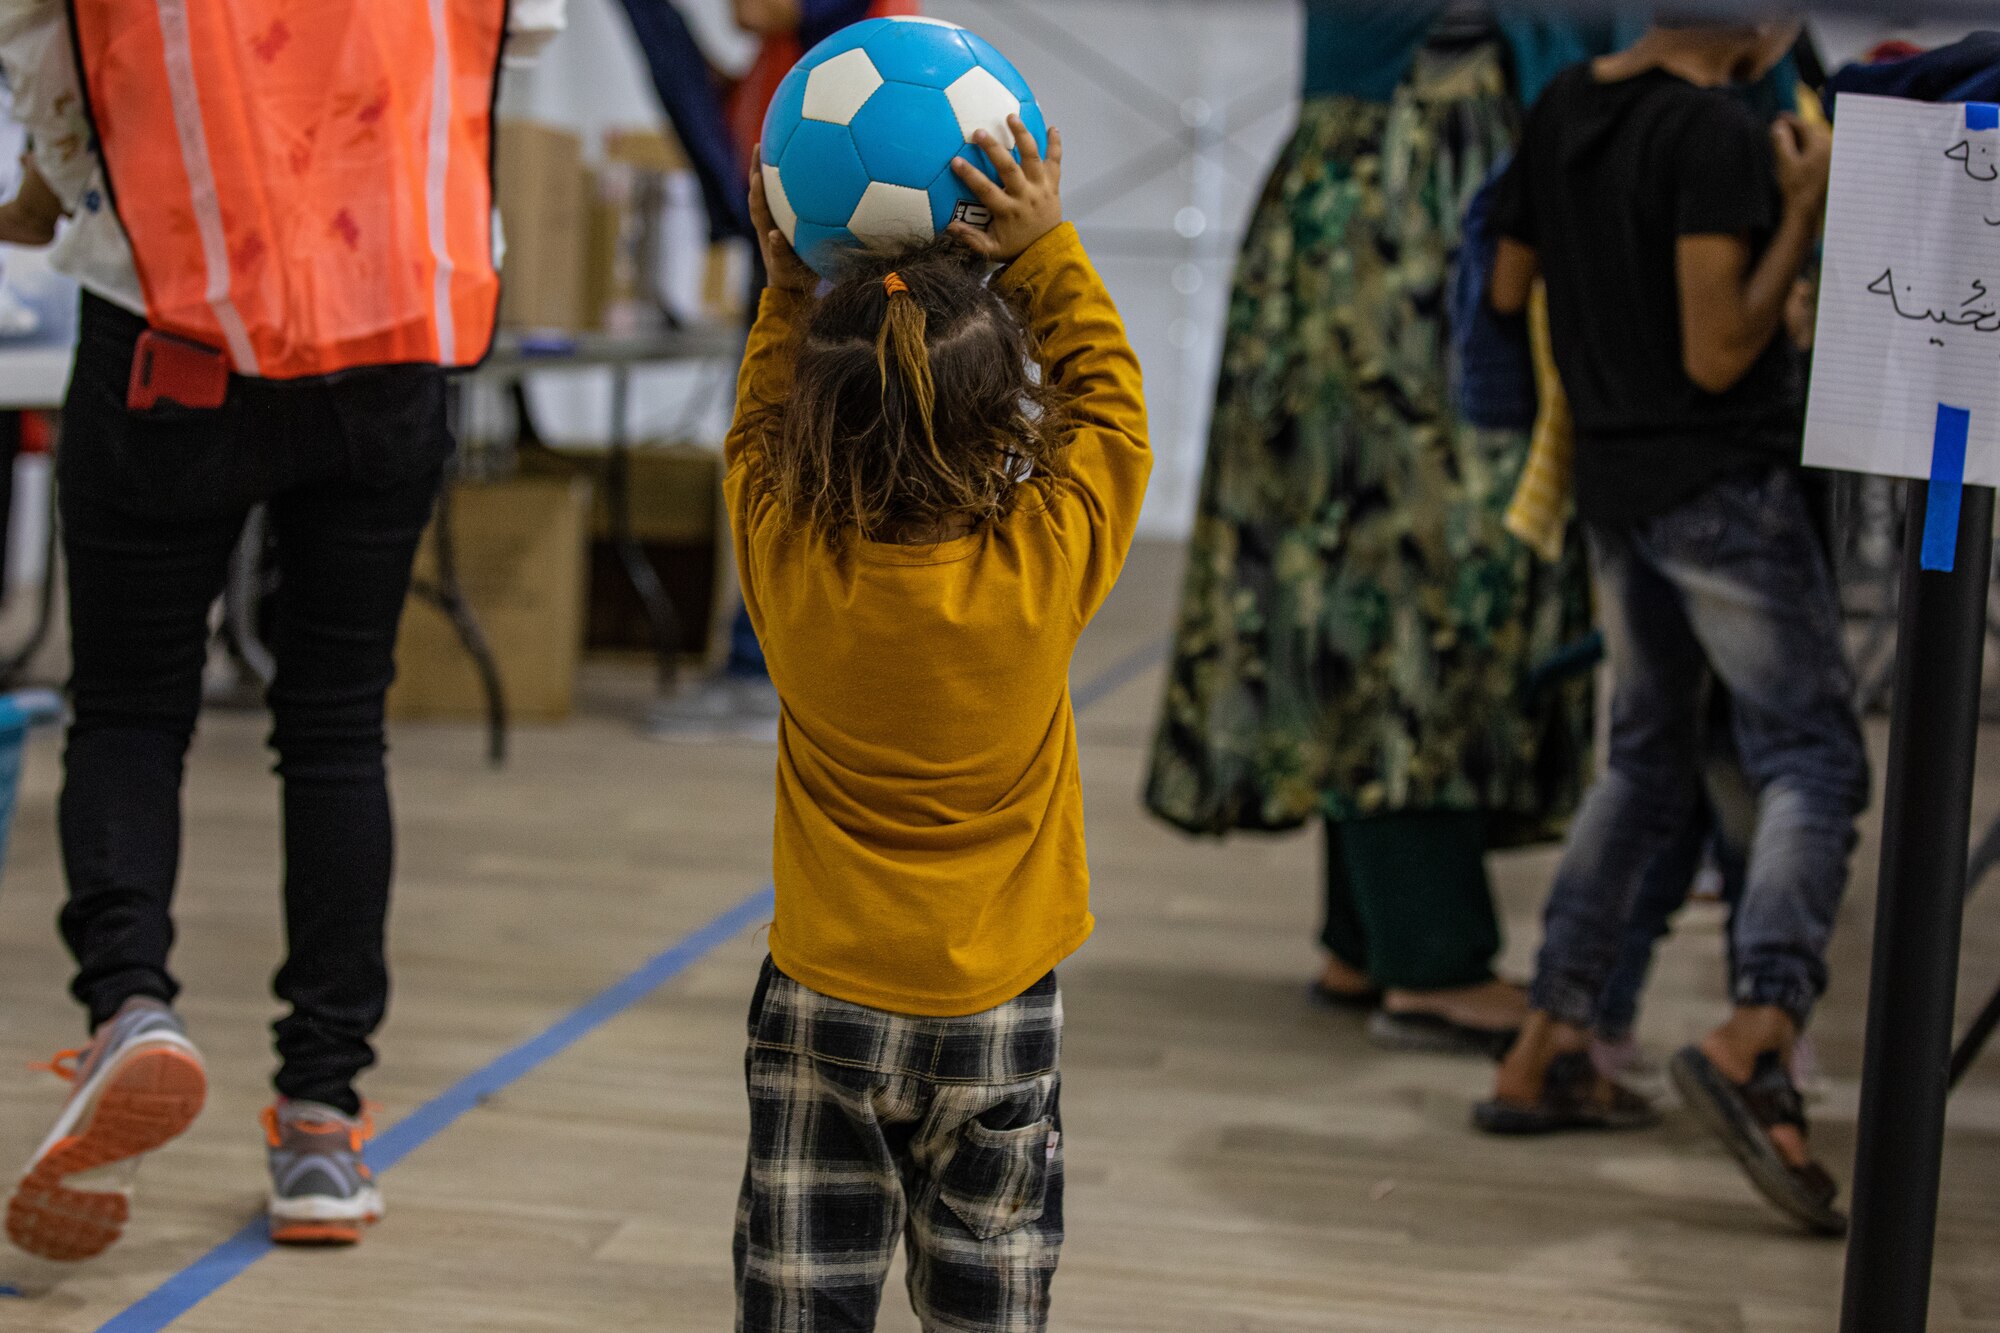 An Afghan child plays with a ball while her family waits in line at the donation center at Task Force-Holloman on Holloman Air Force Base, New Mexico, Oct. 9, 2021. The Department of Defense, through U.S. Northern Command, and in support of the Department of Homeland Security, is providing transportation, temporary housing, medical screening, and general support for at least 50,000 Afghan evacuees at suitable facilities, in permanent or temporary structures, as quickly as possible. This initiative provides Afghan personnel essential support at secure locations outside Afghanistan. (U.S. Army photo by Spc. Nicholas Goodman)